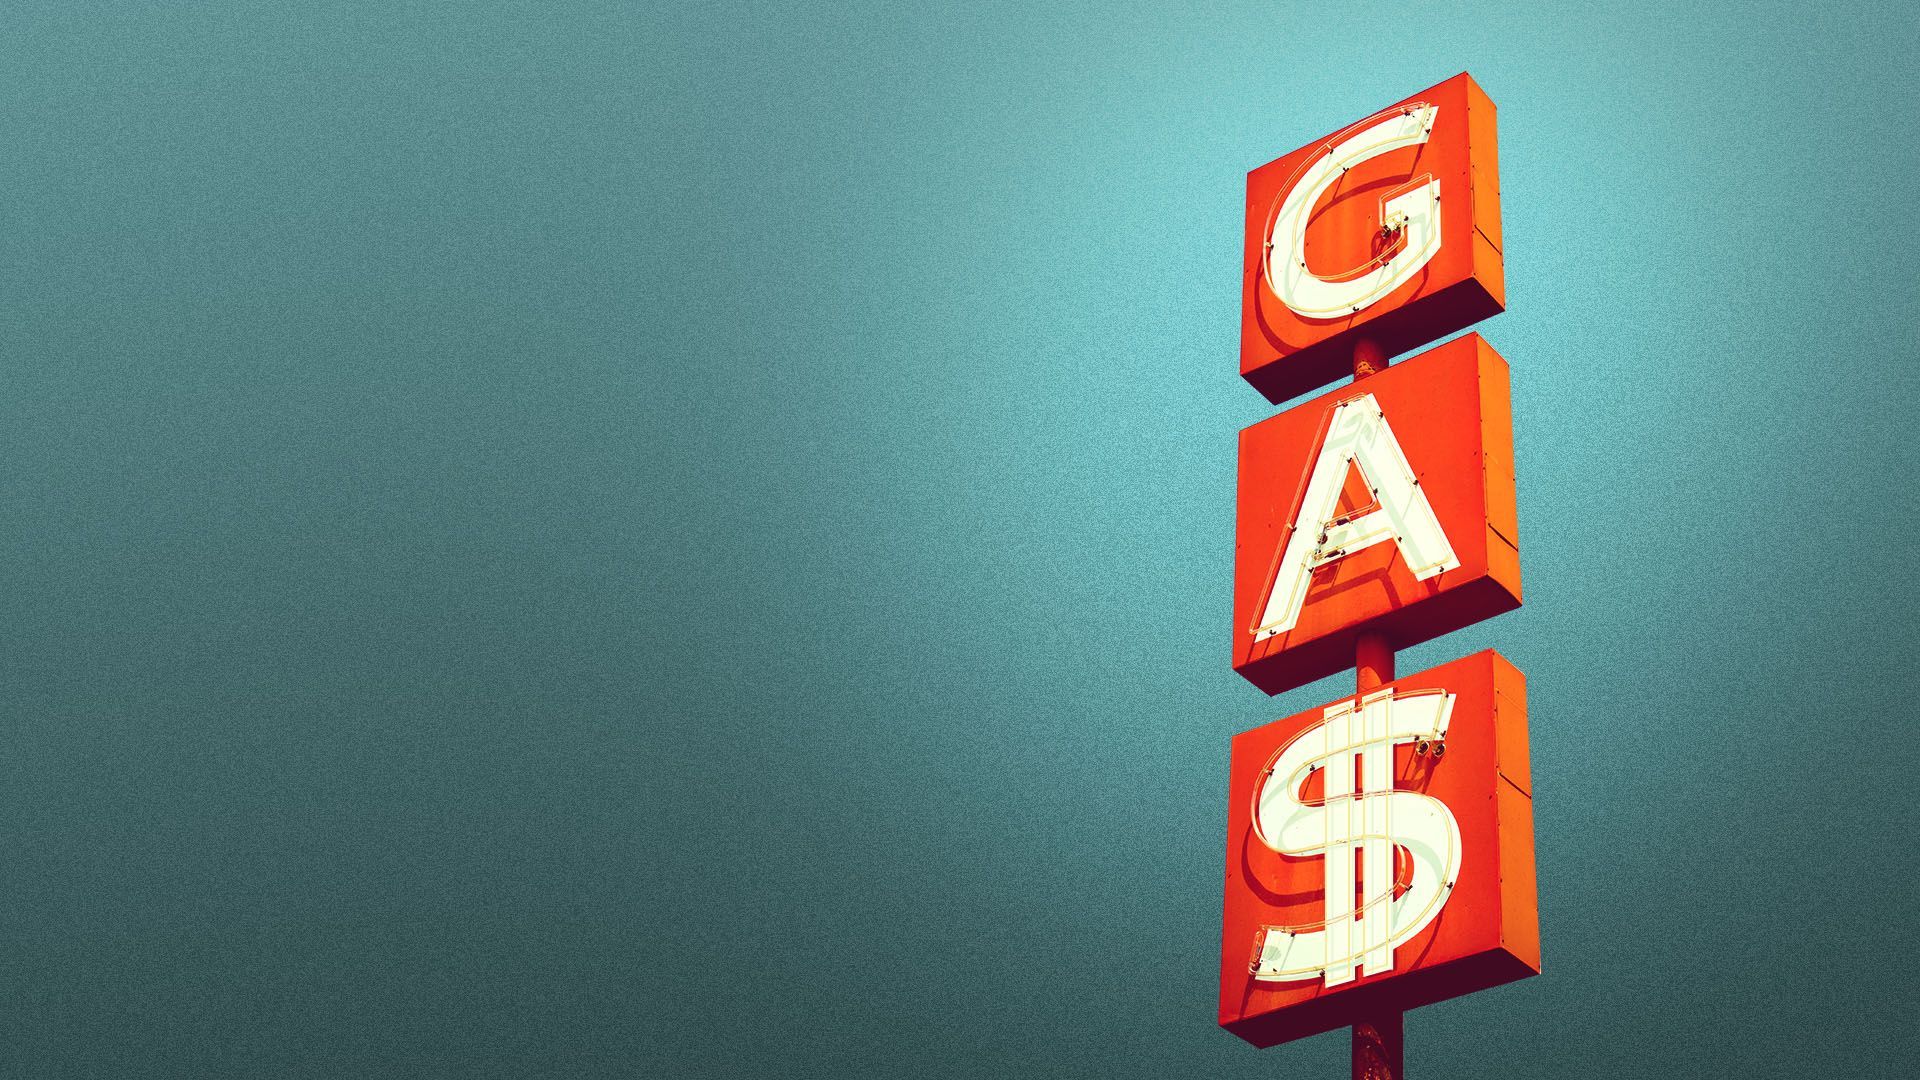 Illustration of a gas sign with a dollar sign for the "S"